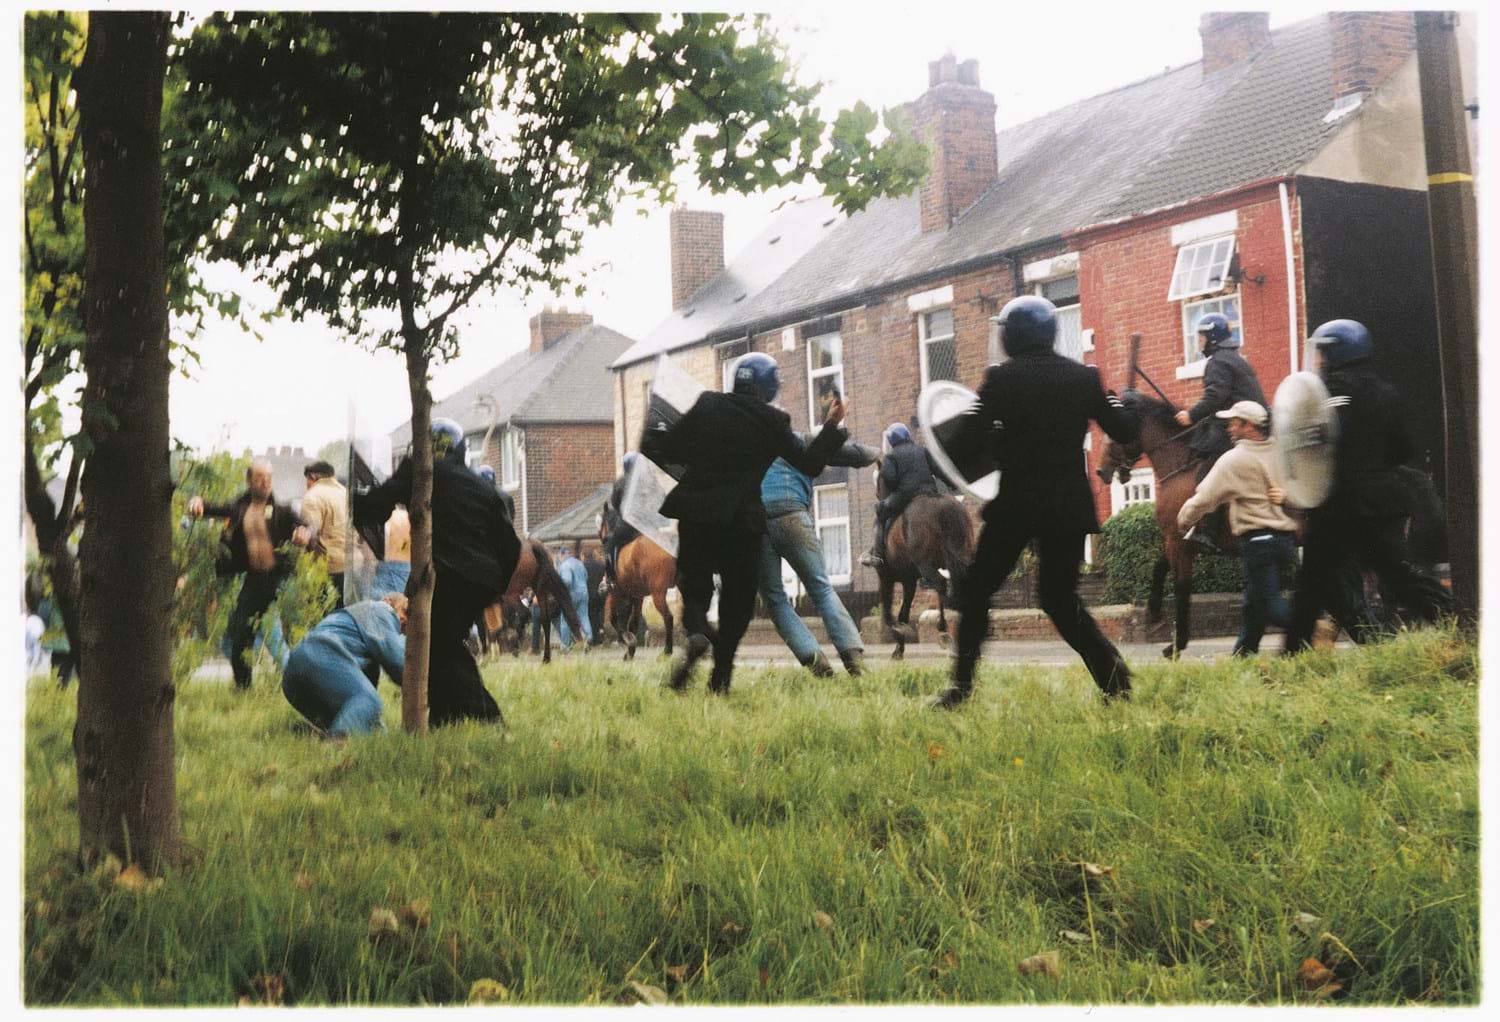 Photograph still from artist Jeremy Deller's The Battle of Orgreave (An Injury to One is an Injury to All) depicting clashes between police and protestors